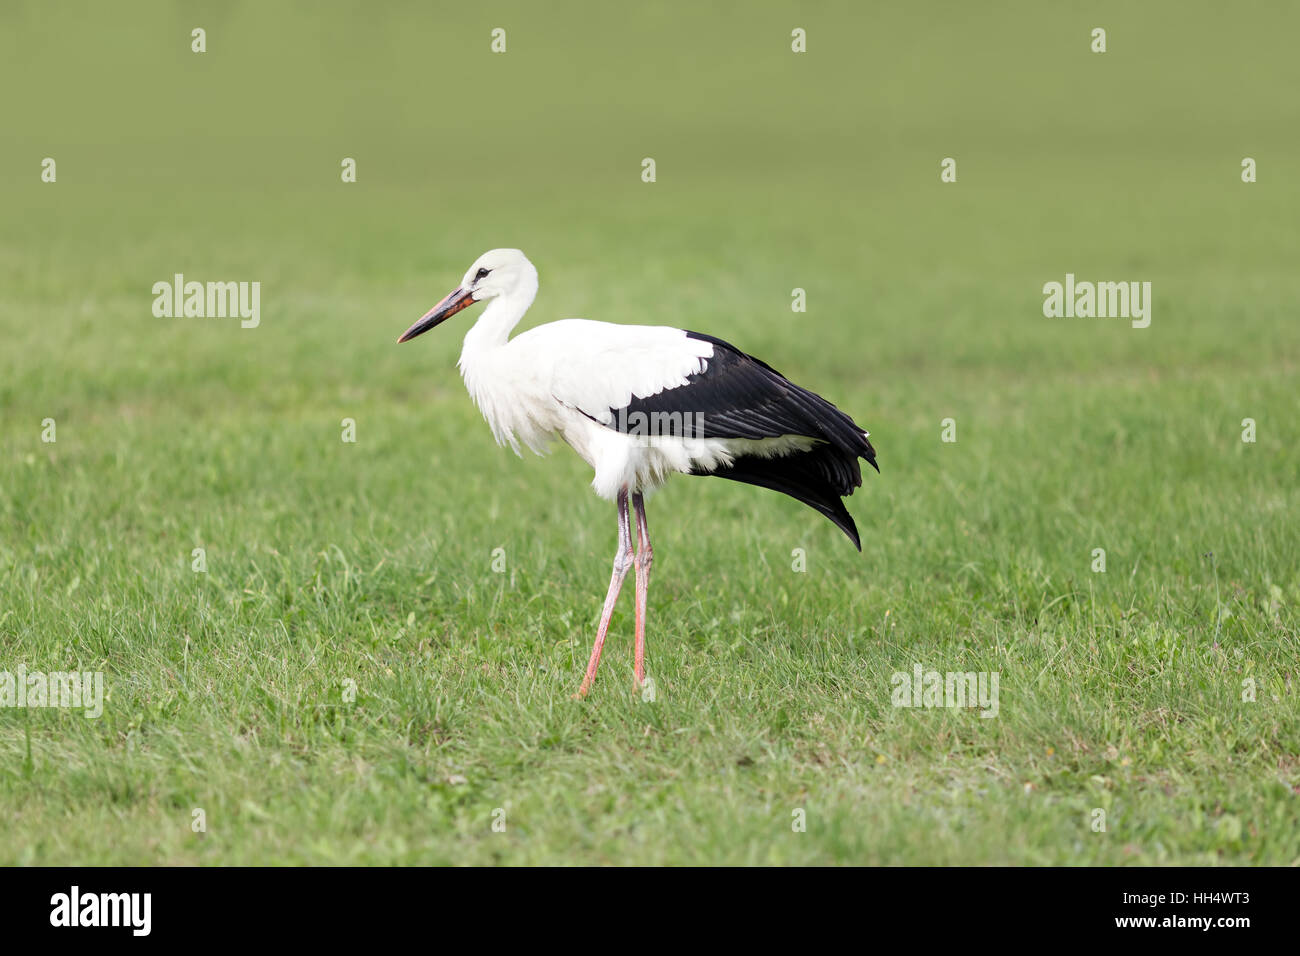 portrait of a stork in its natural habitat Stock Photo